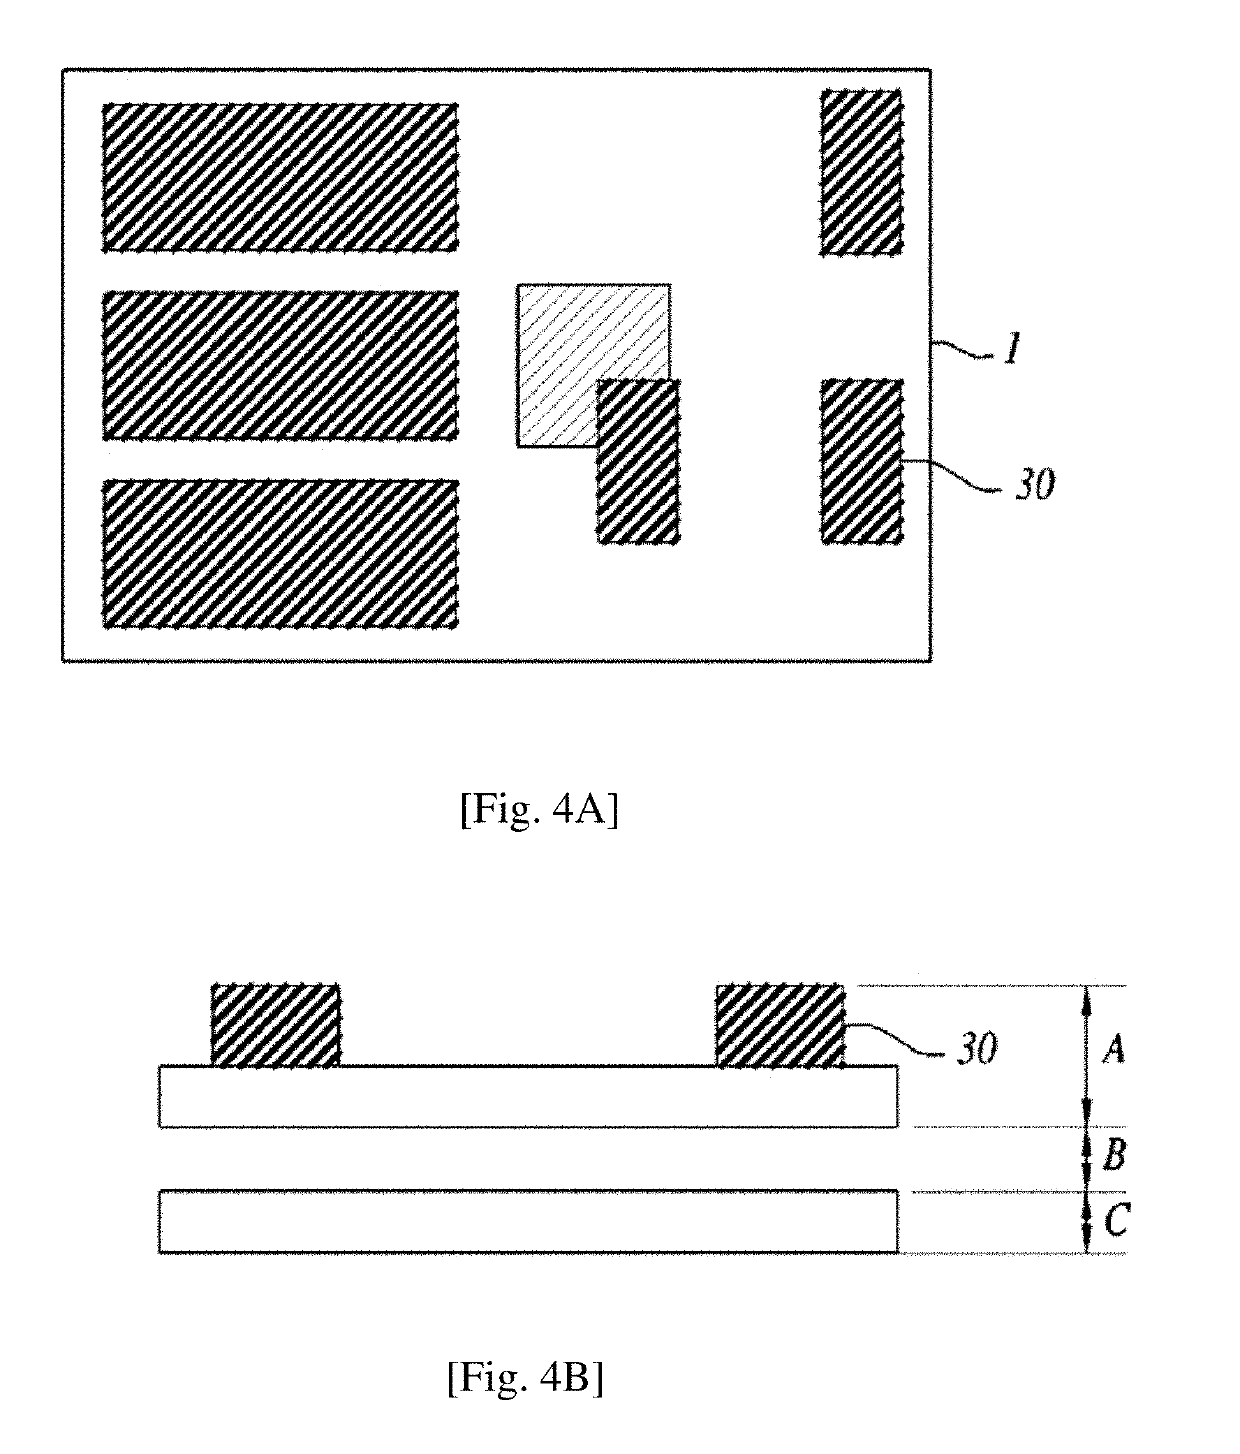 Method for inspecting ball grid array-type semiconductor chip package